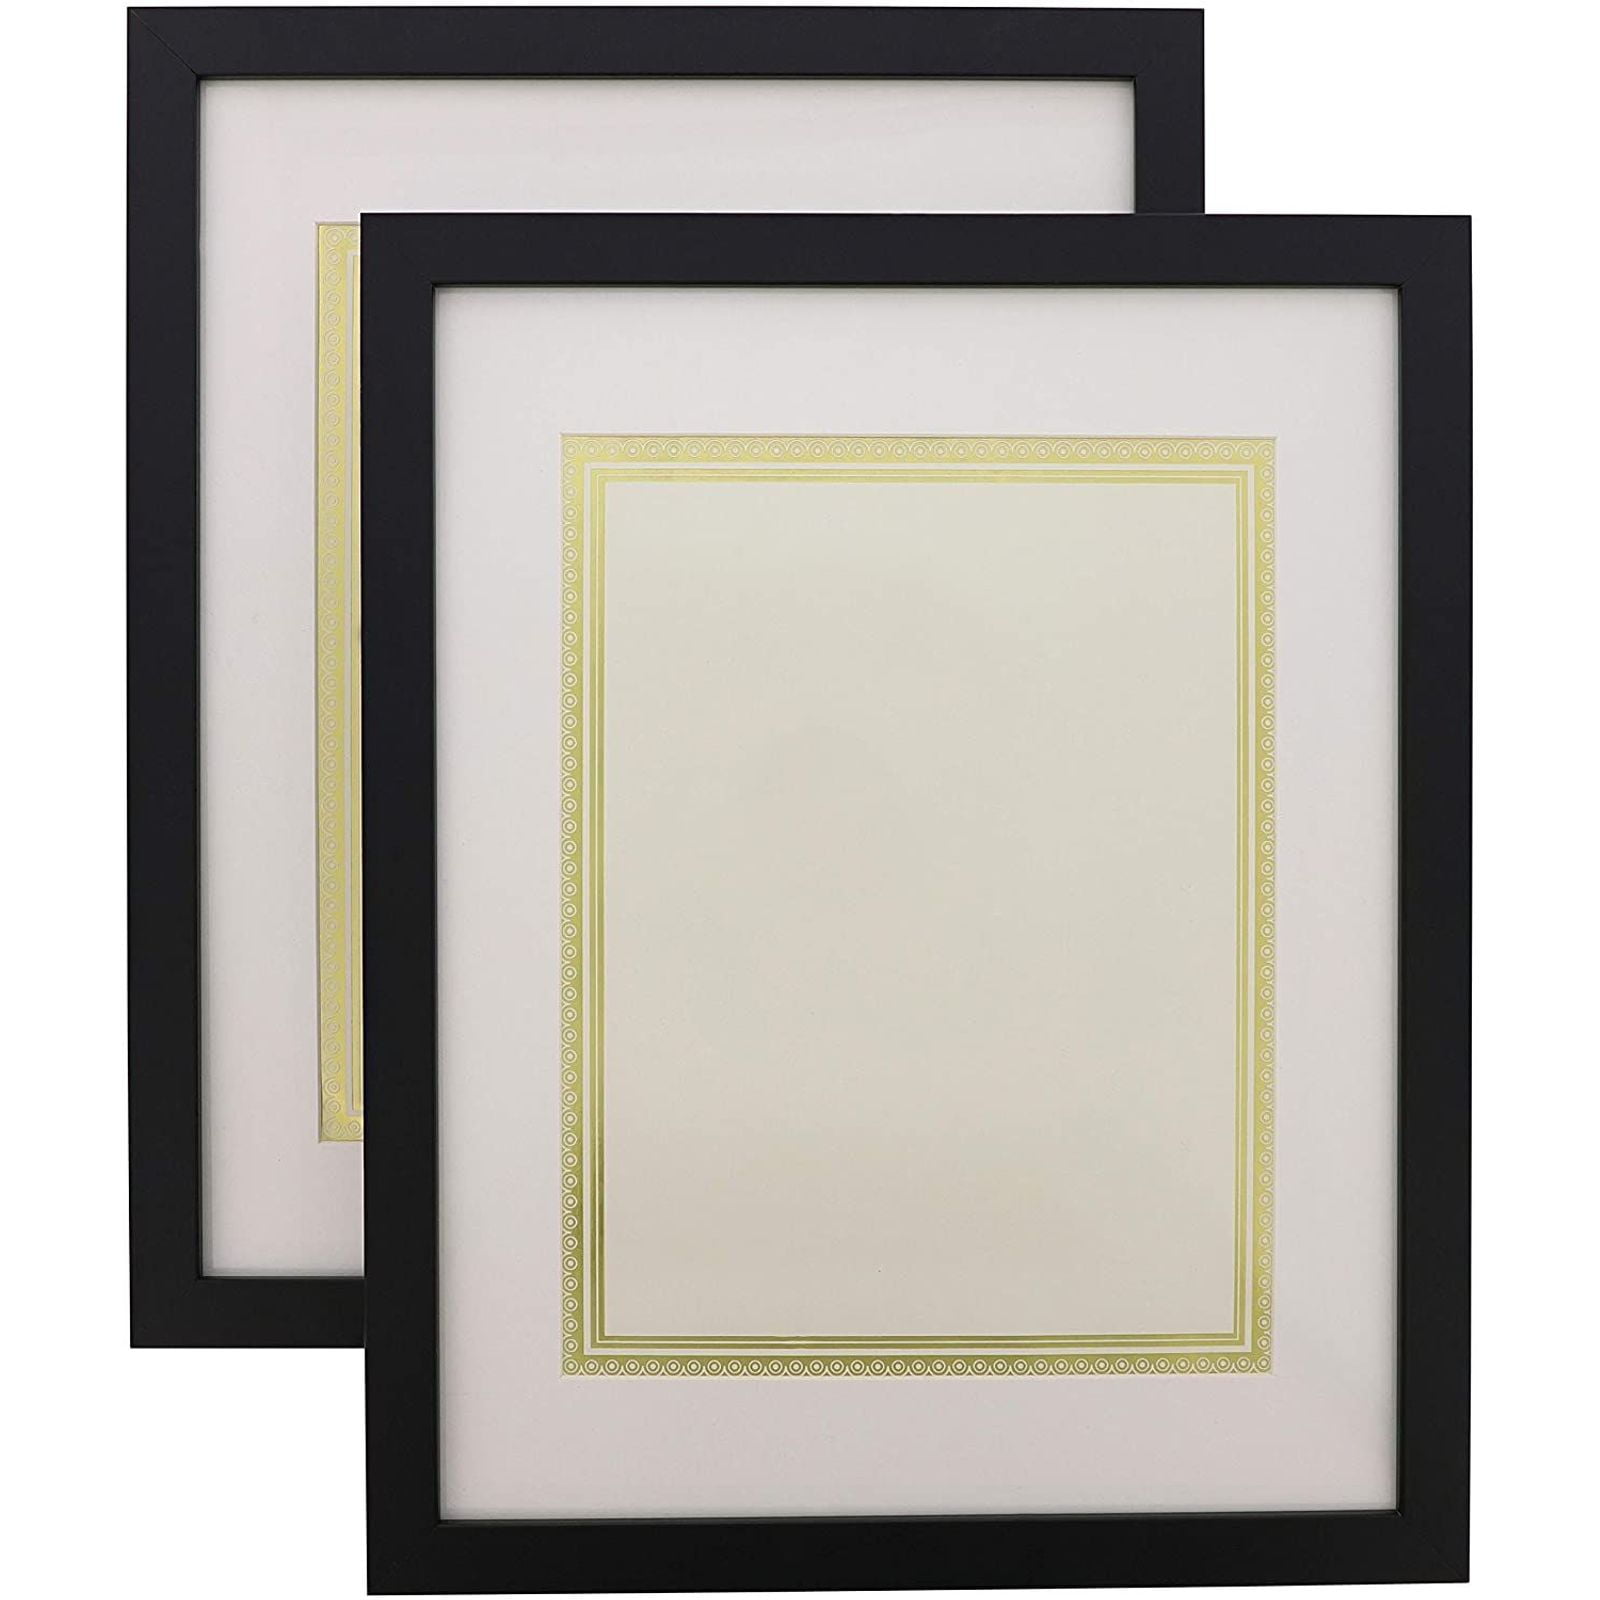 A4 Certificate Photo Frame Shiny Black Or Silver For Home Office Wall Or Table 